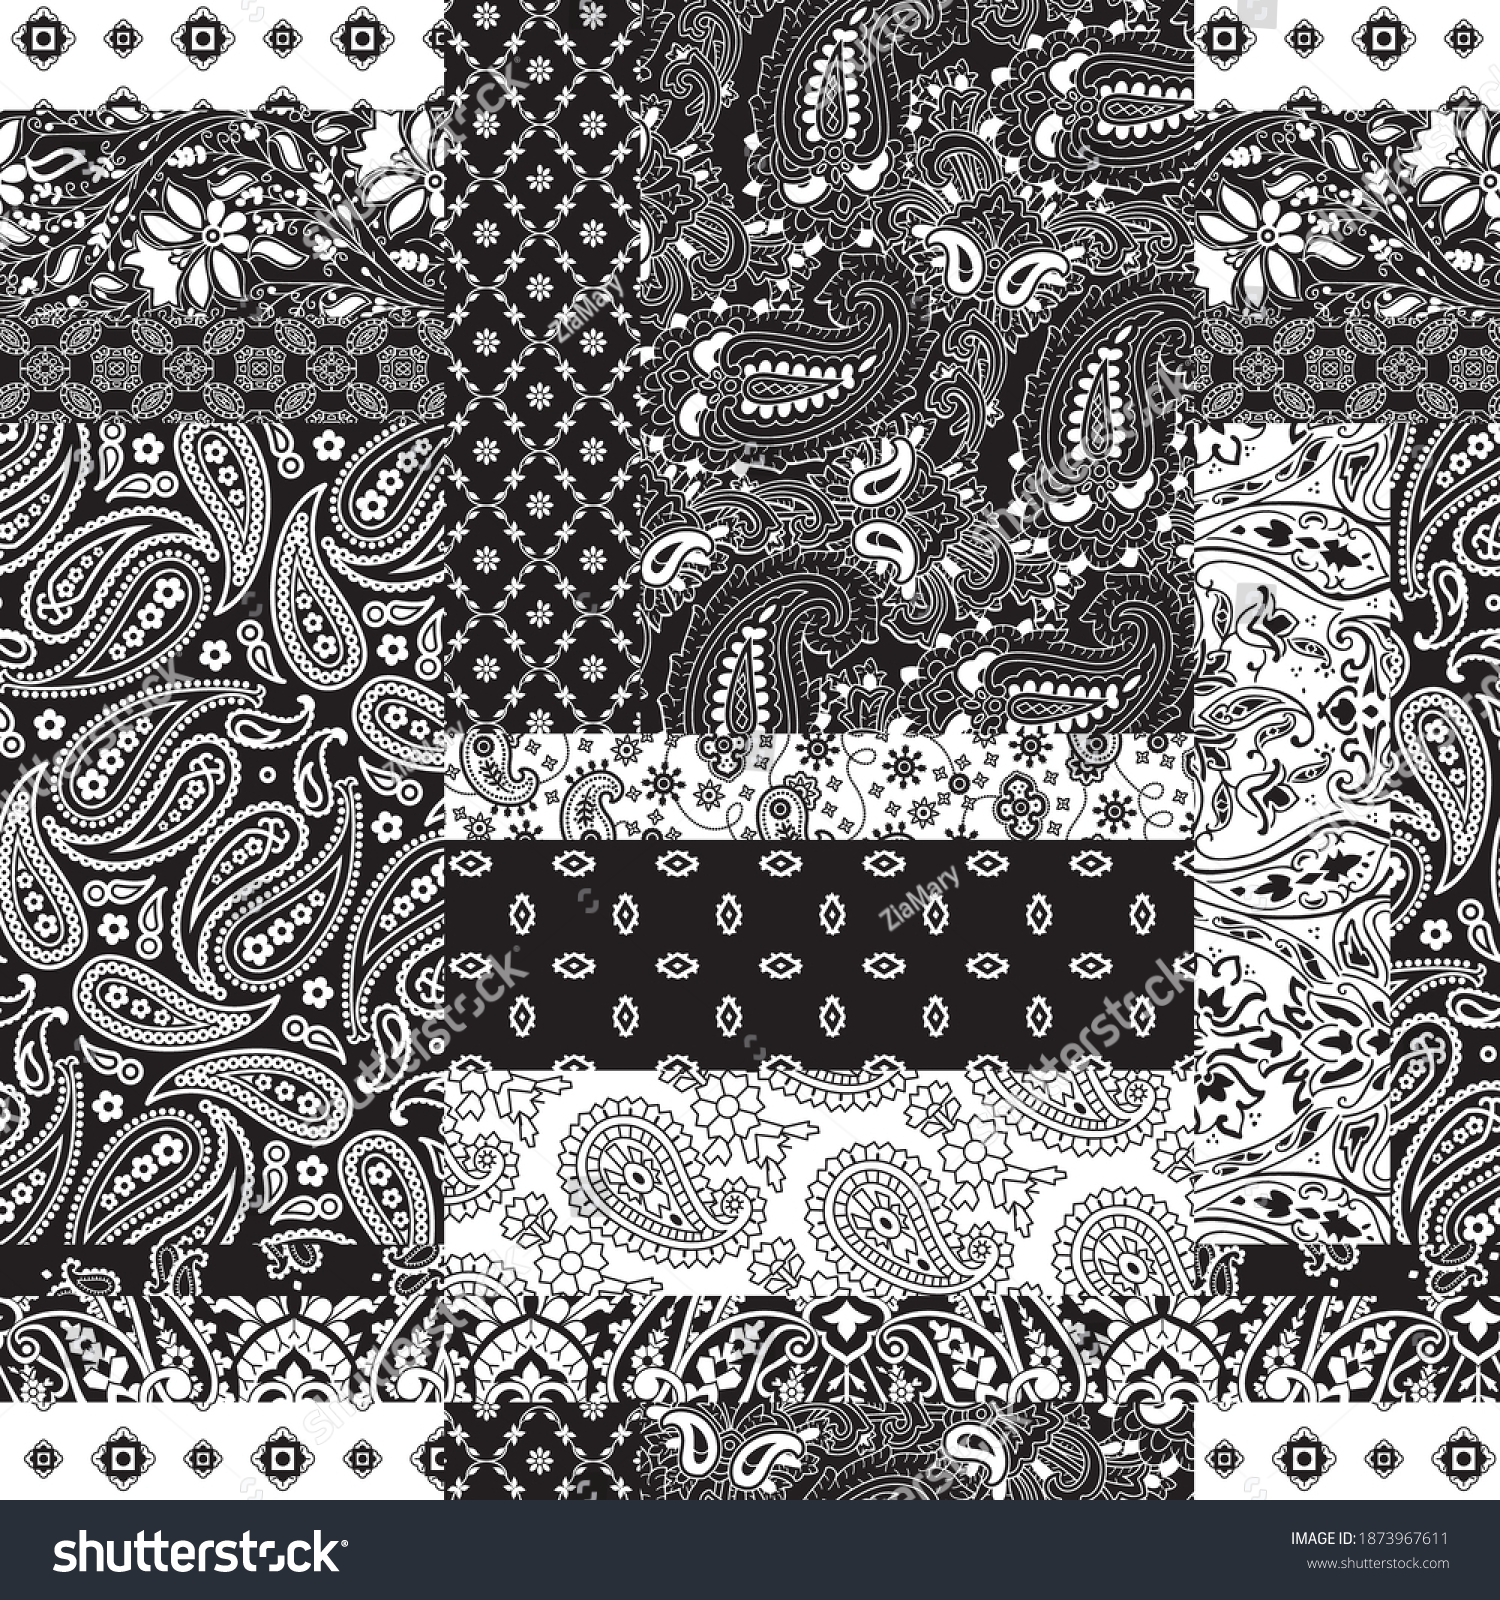 SVG of Cashmere paisley bandana fabric patchwork abstract vector seamless pattern wallpaper svg